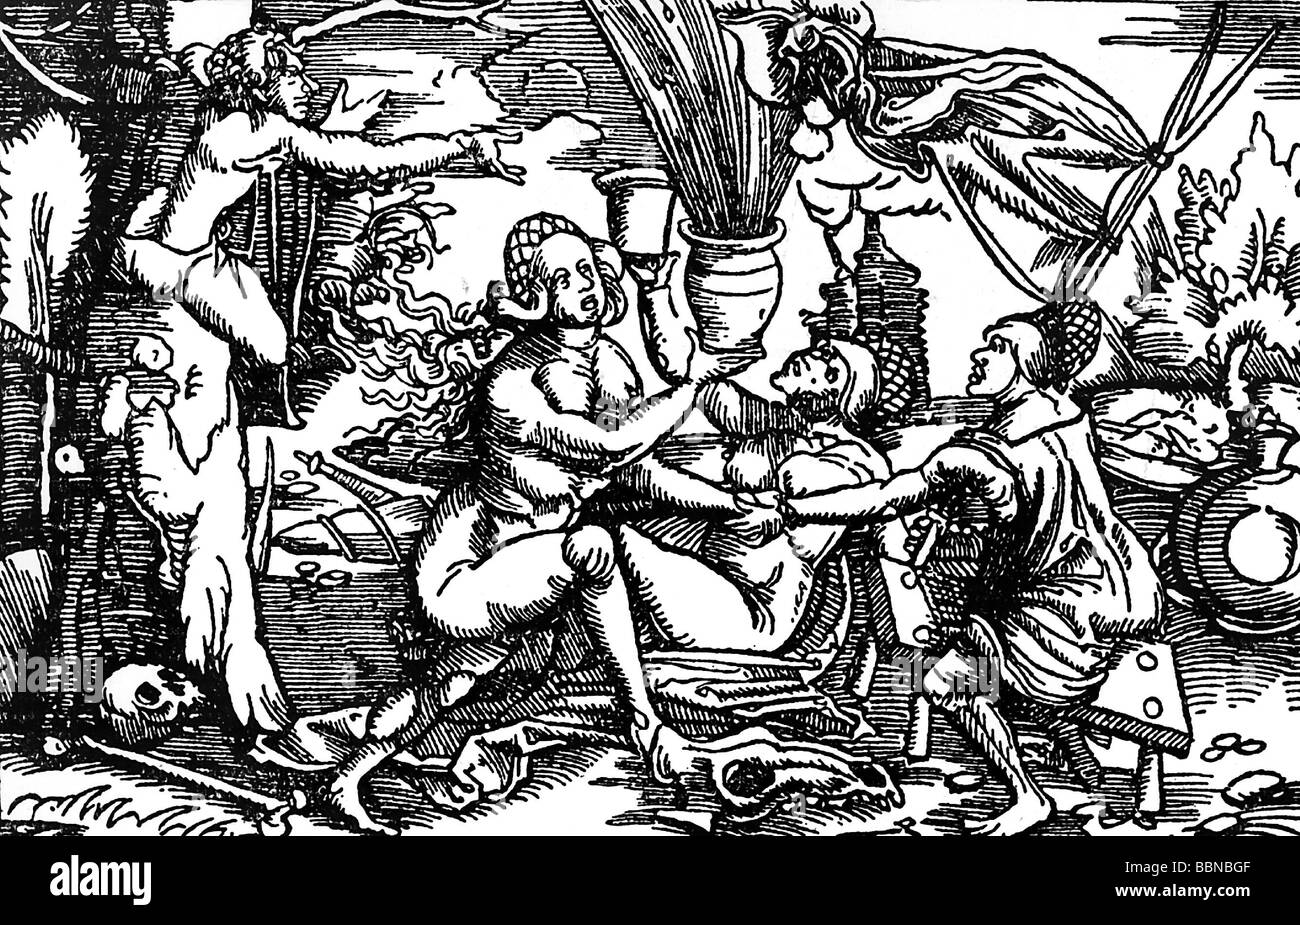 witchcraft, witches preparing a love potion, woodcut, 16th century, witch, aphrodisiac, fine arts, women, sorcery, magic, historic, historical, people, Stock Photo